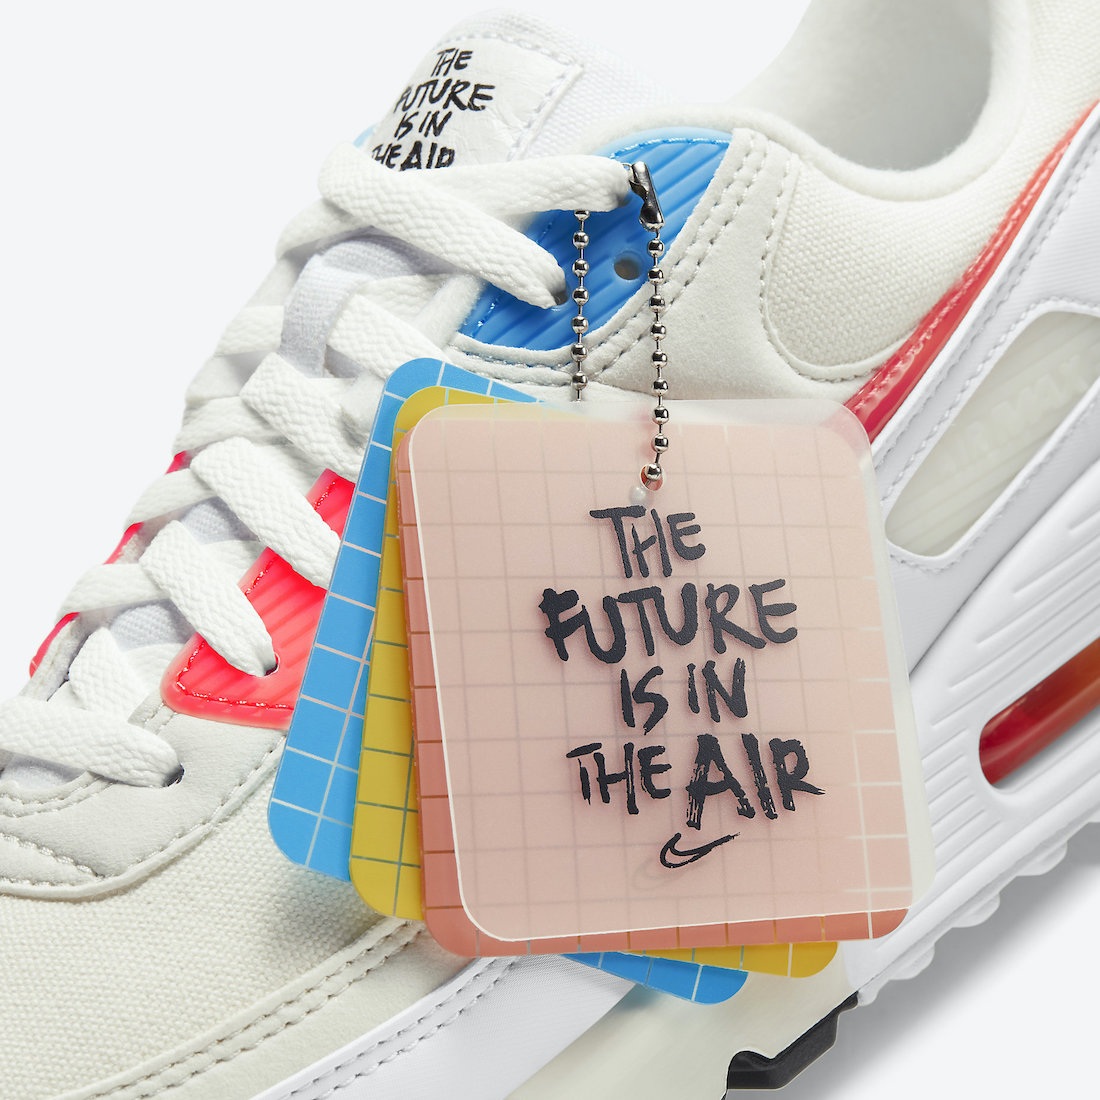 Nike Air Max 90 The Future is in the Air DD8496-161 Release Date